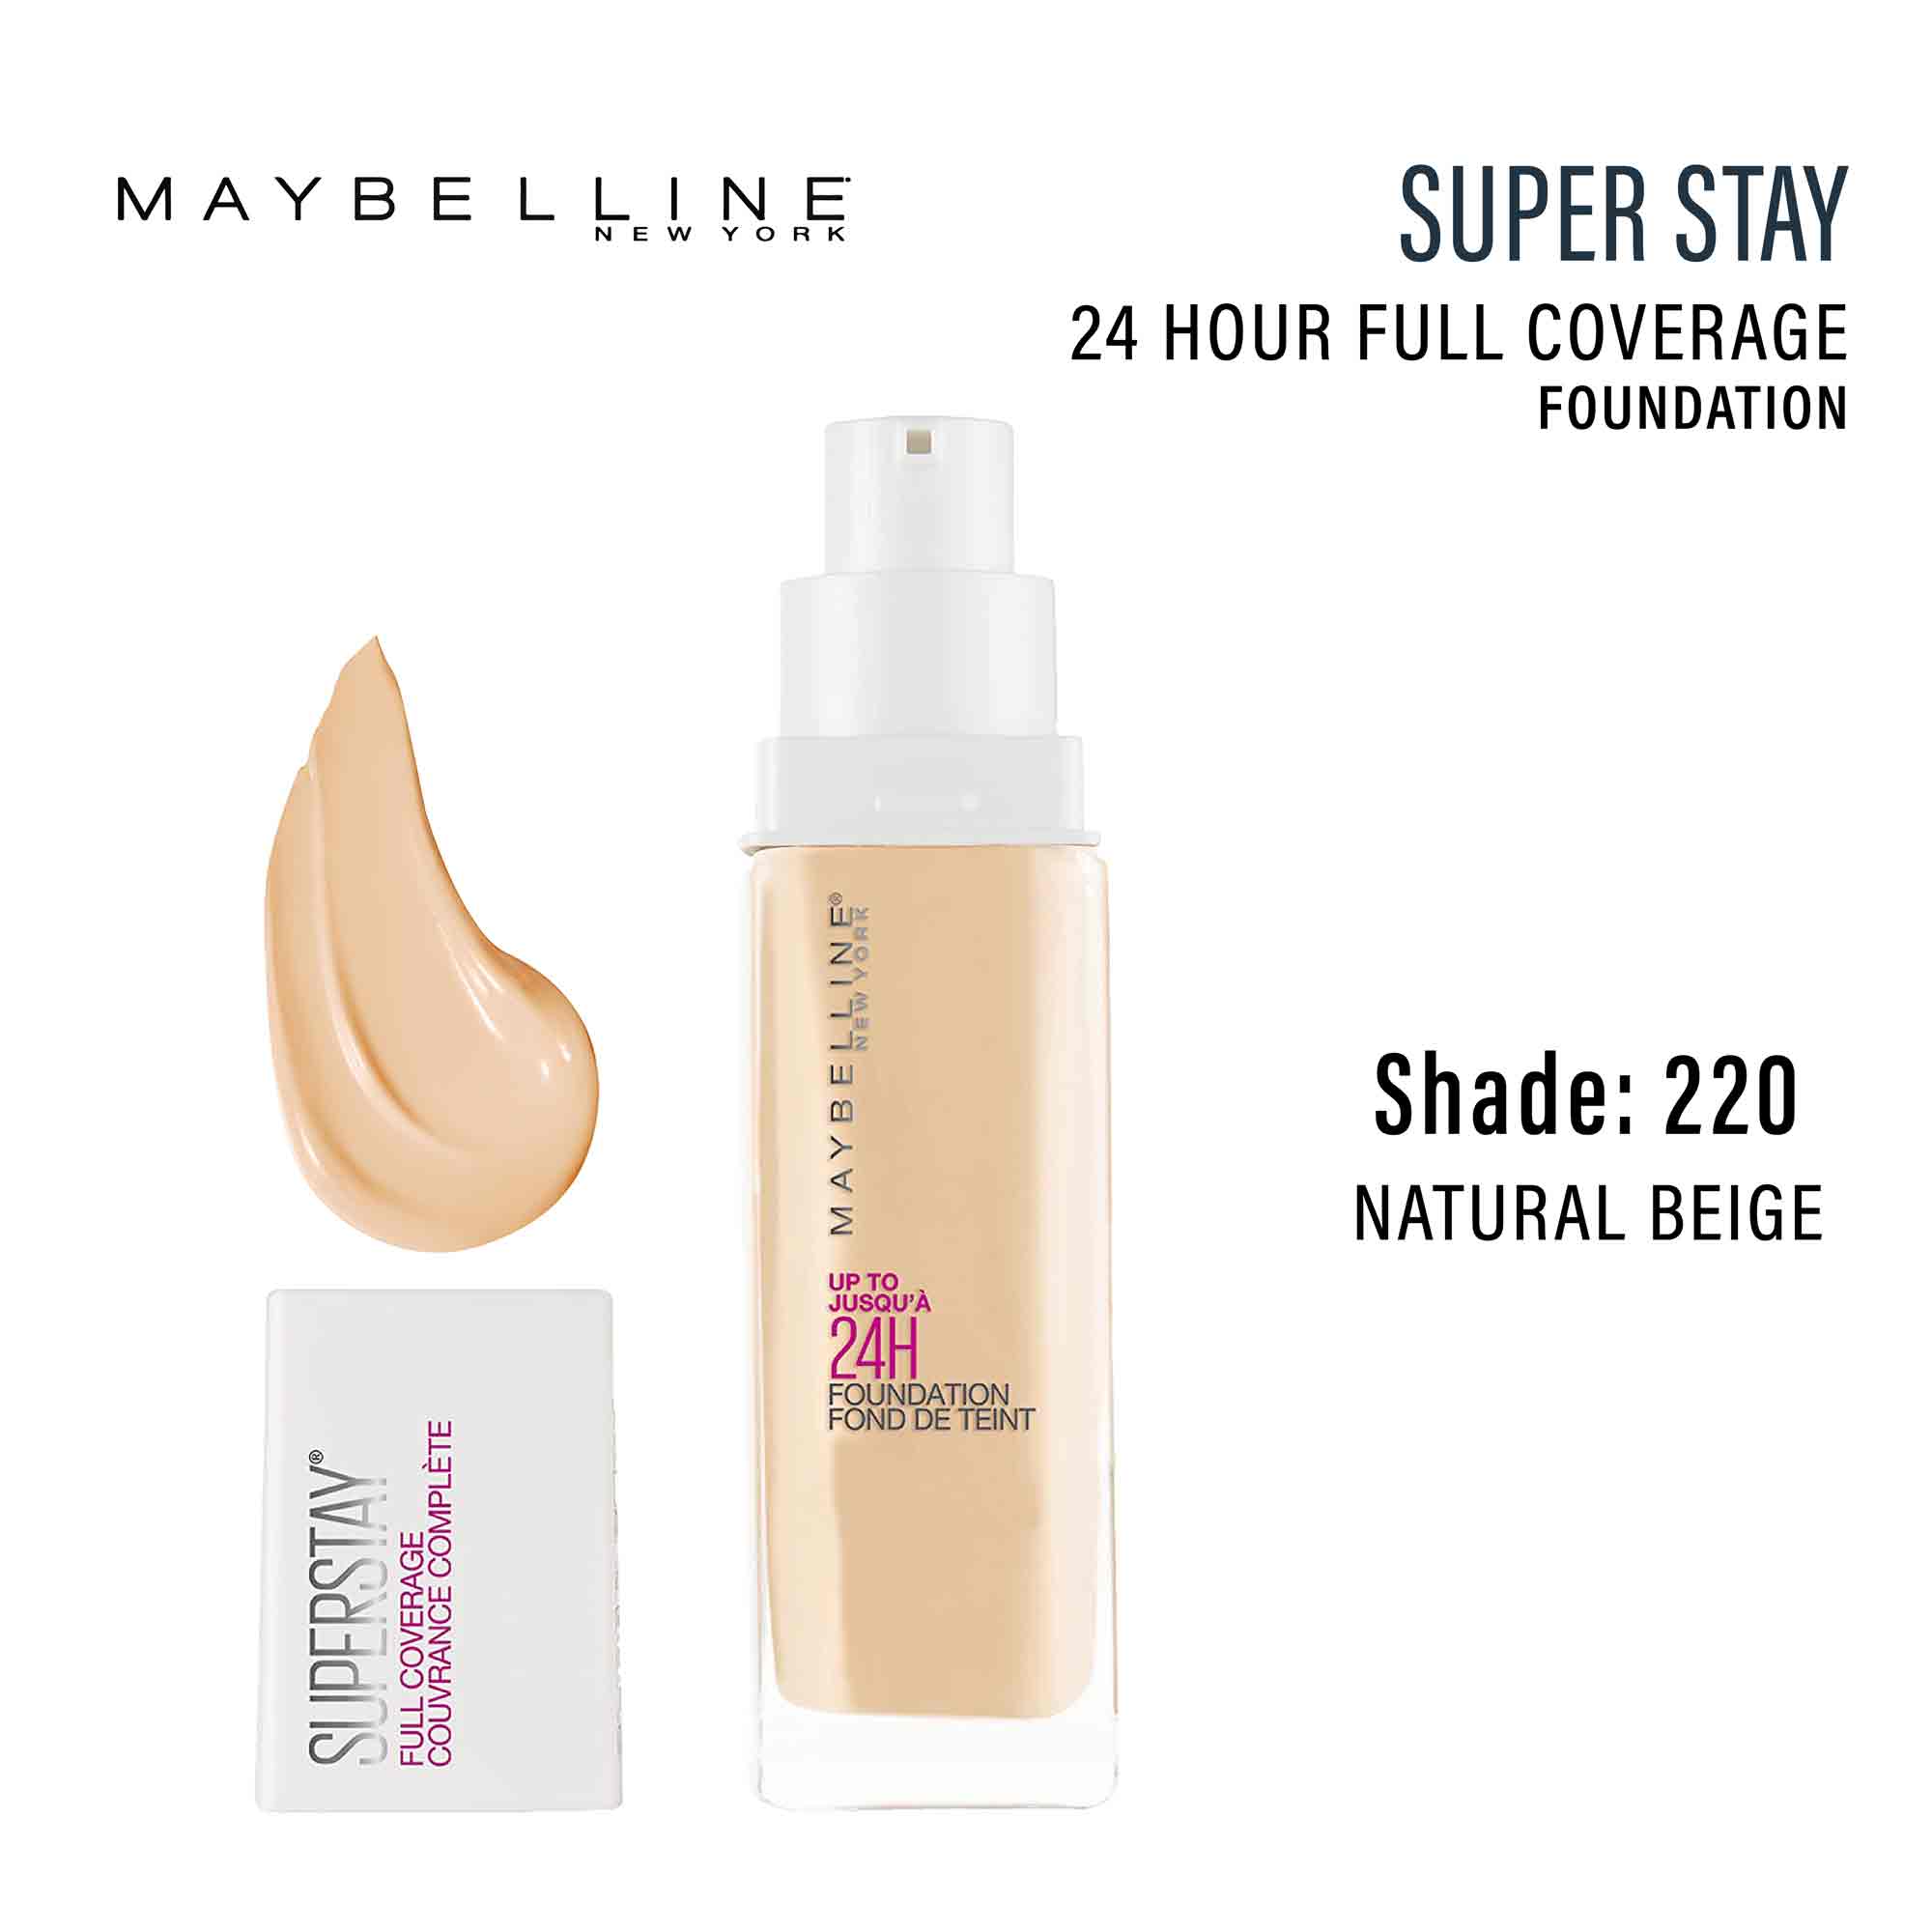 Maybelline New York Maybelline Super Stay Full coverage liquid Foundation  Makeup, 127 Sand Beige, 30 Milliliters (Packaging may vary)